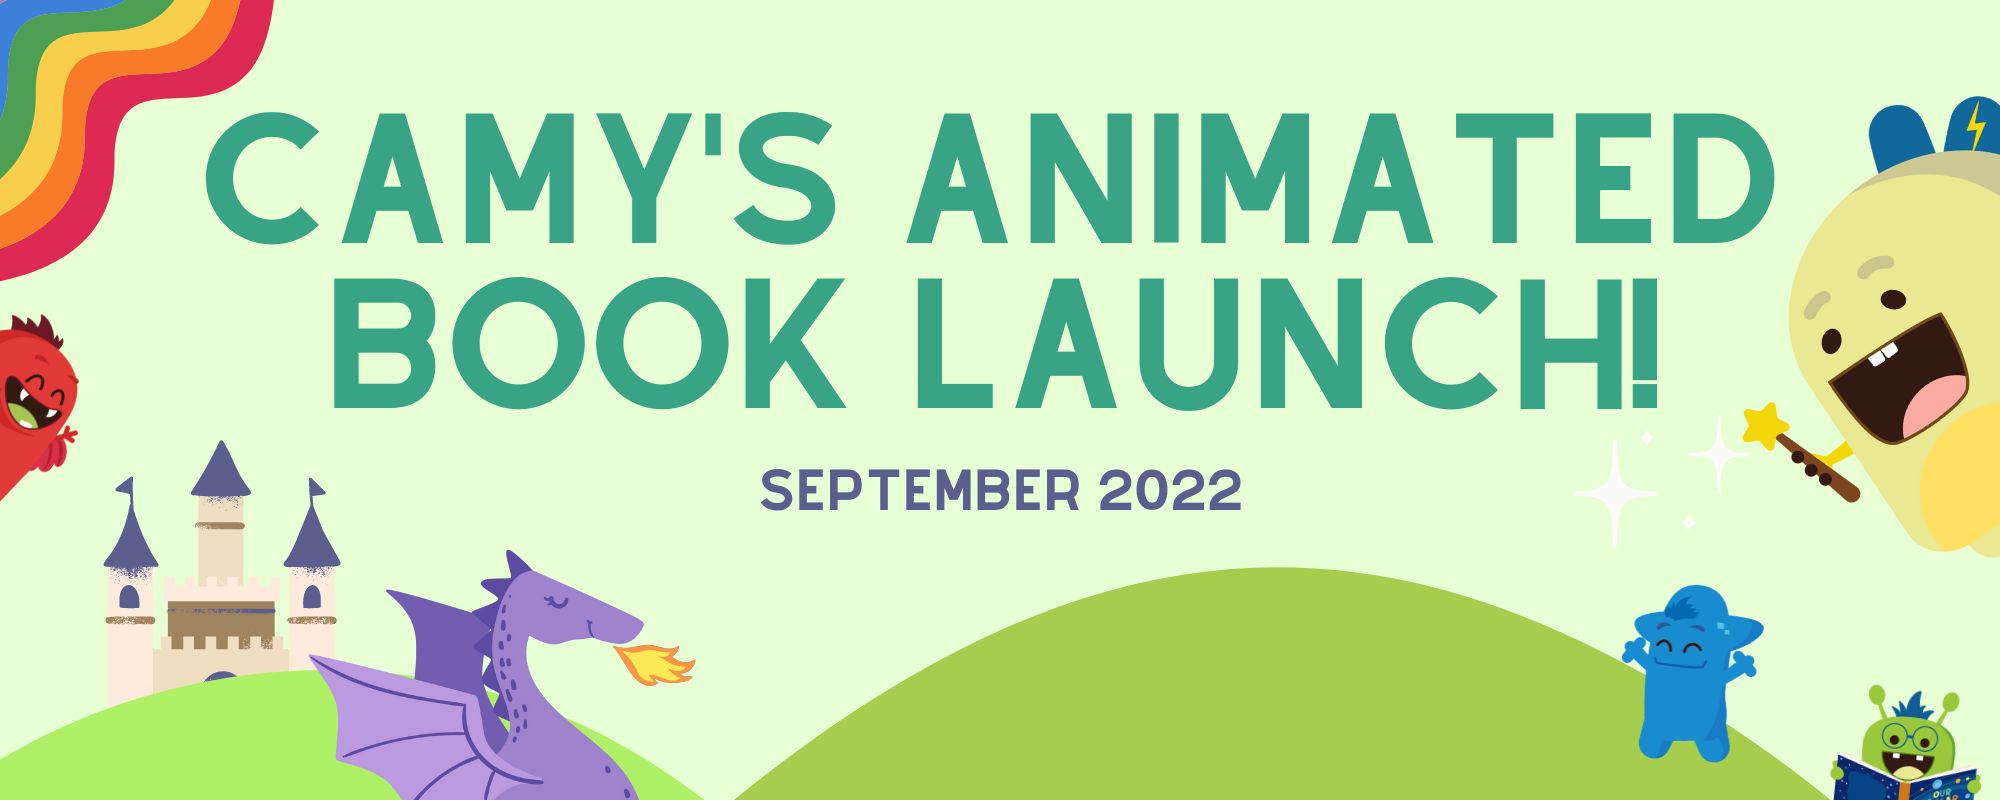 Camy’s Animated Book Launch image